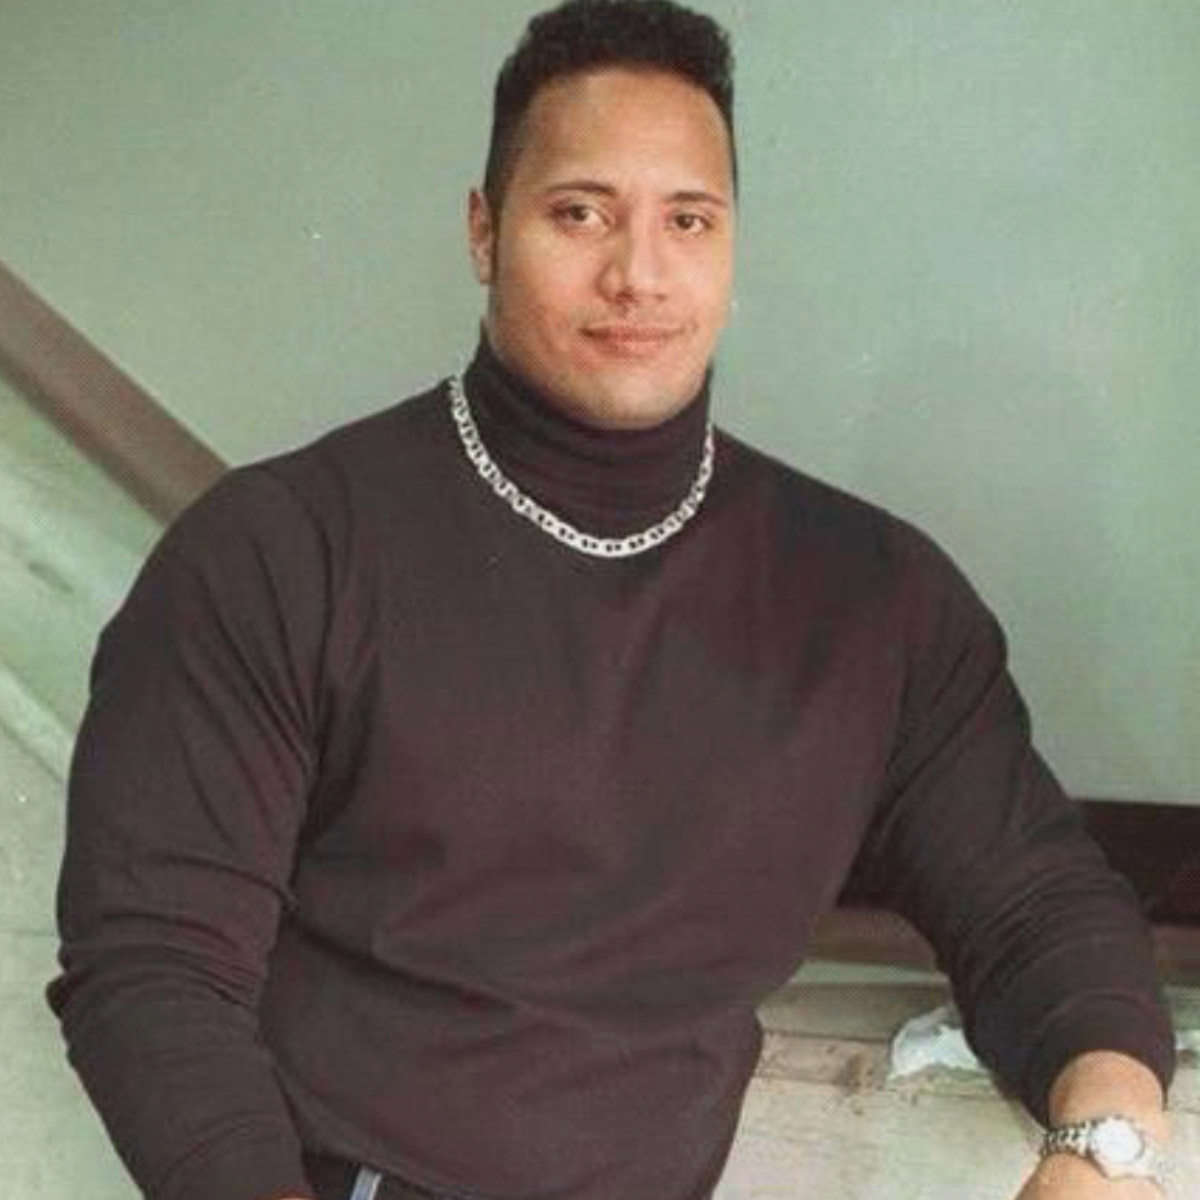 The Rock in his turtleneck